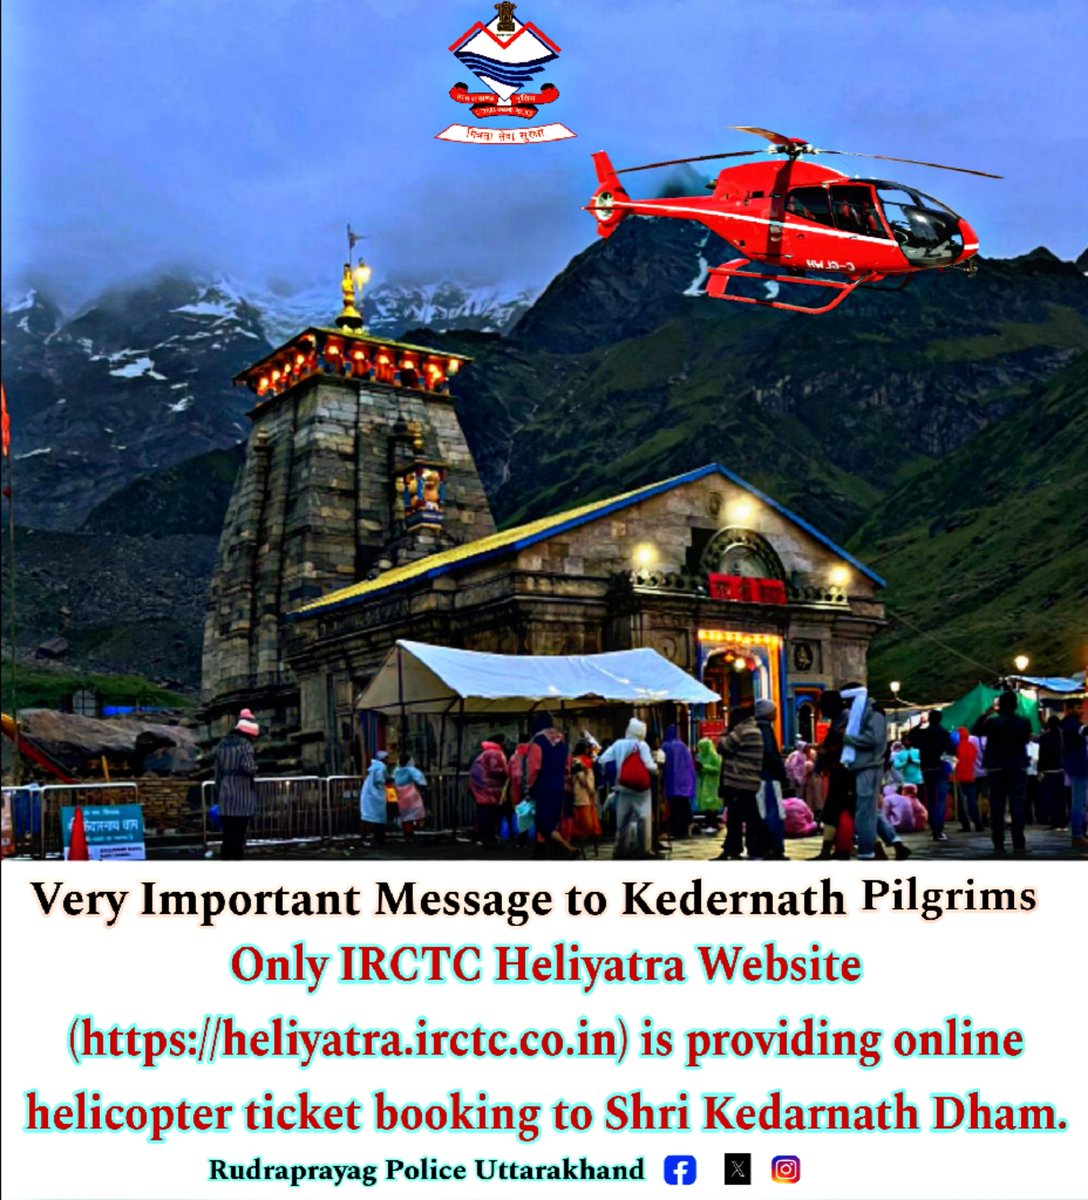 Important Message For Upcoming Kedarnath Dham Yatra
● Only IRCTC HeliYatra Website (heliyatra.irctc.co.in) is providing online helicopter ticket booking to Shri Kedarnath Dham. (Keep checking this website from time to time to get updates for ticket booking.)